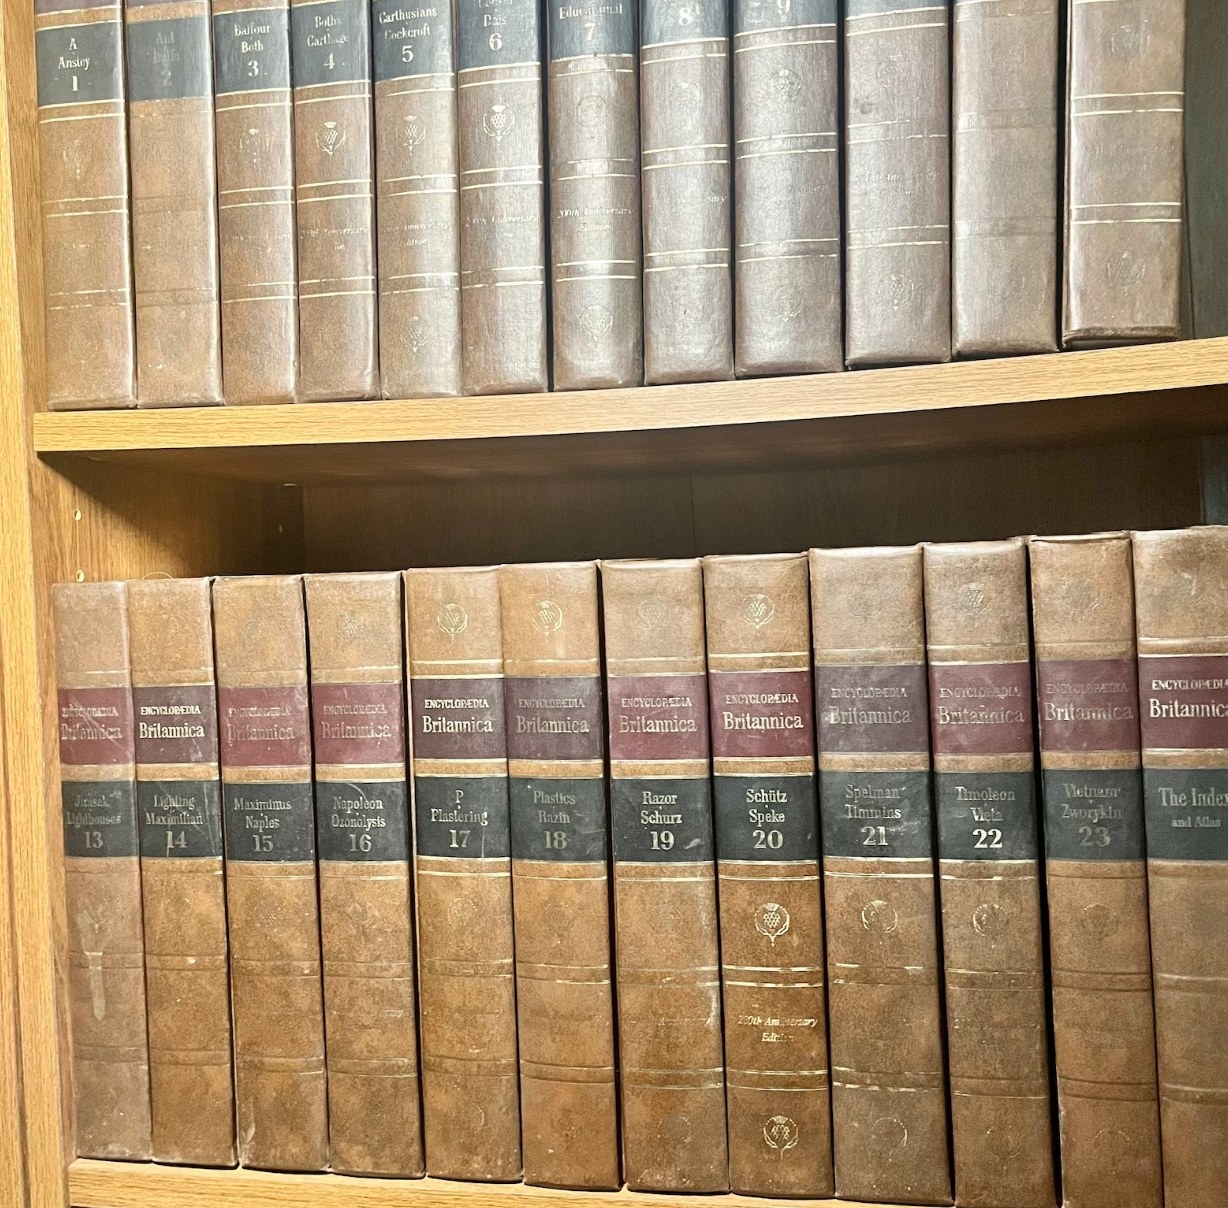 An Encyclopedia Britannica set from 1970 sits on a shelf